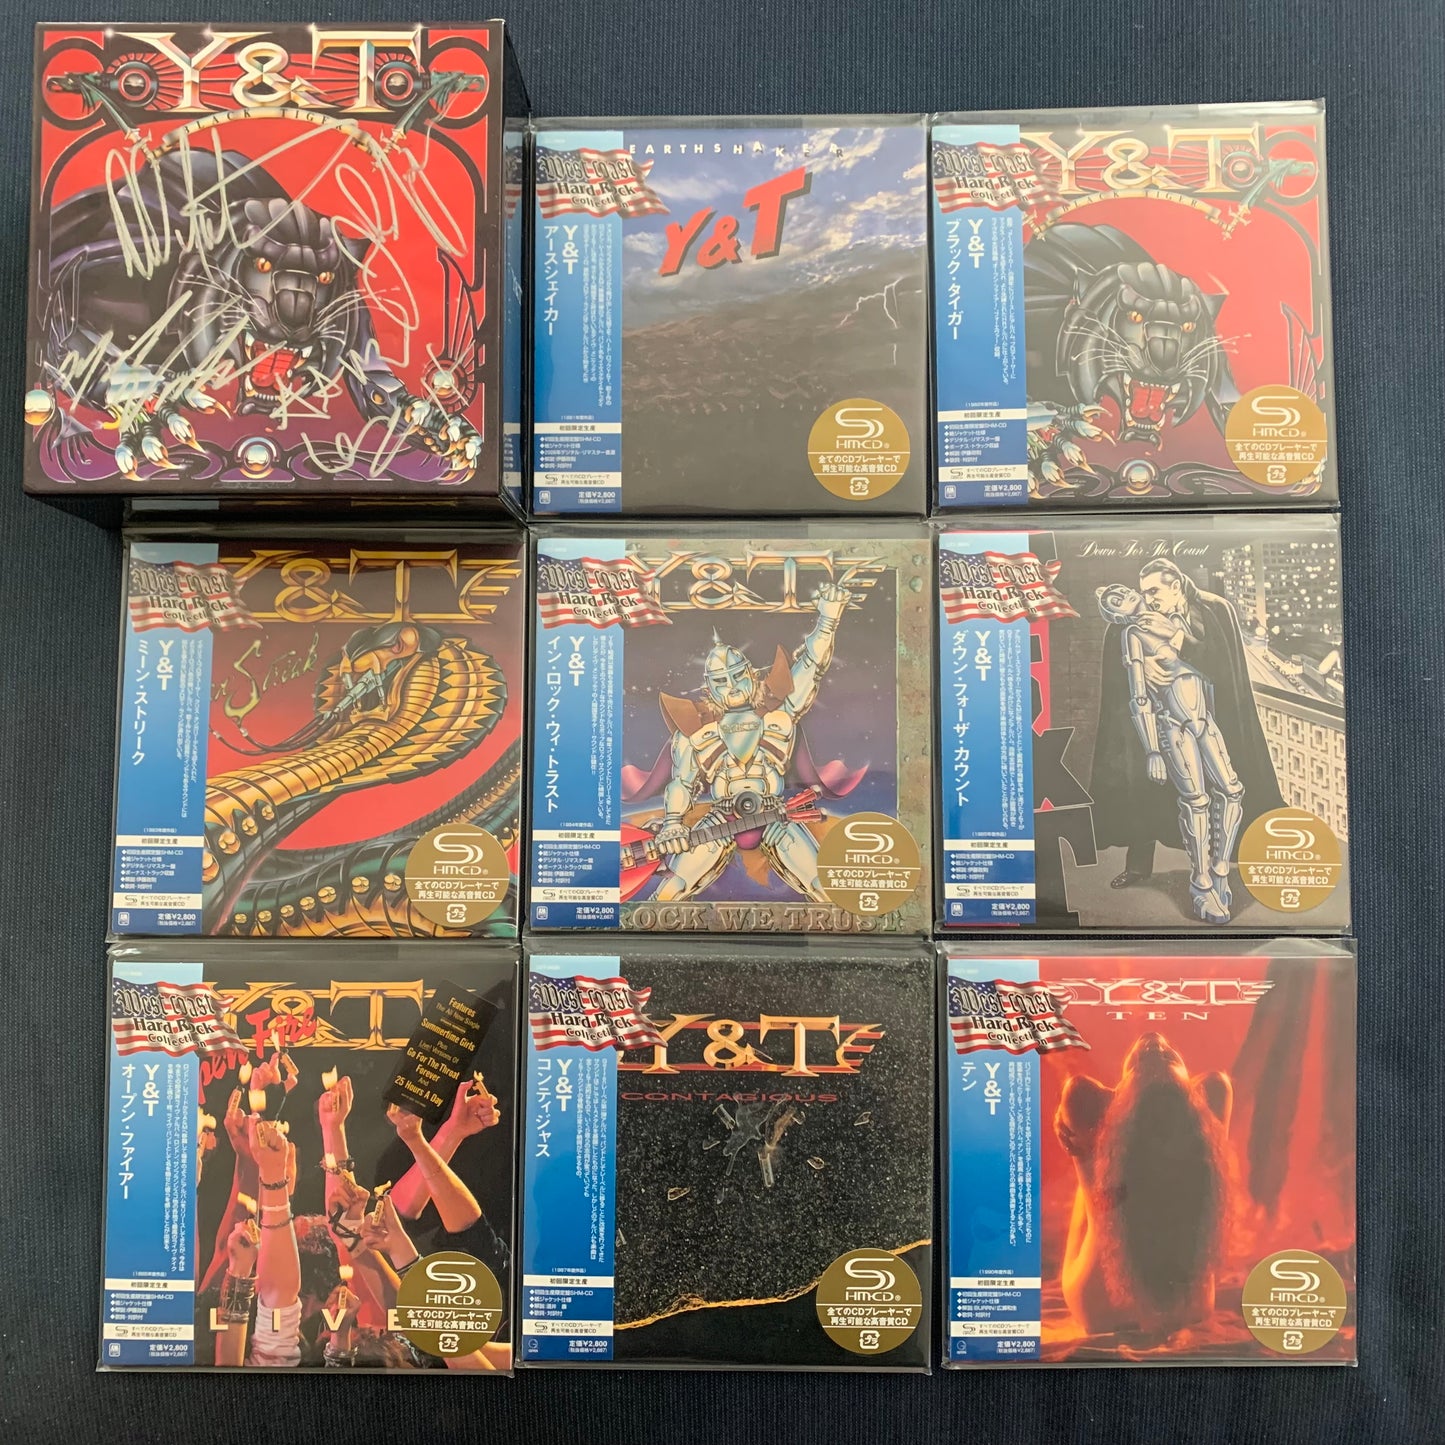 EXTREMELY RARE Y&T (Yesterday & Today) Black Tiger Japanese Release 8 CD Box Set Autographed by the current Y&T Line-Up